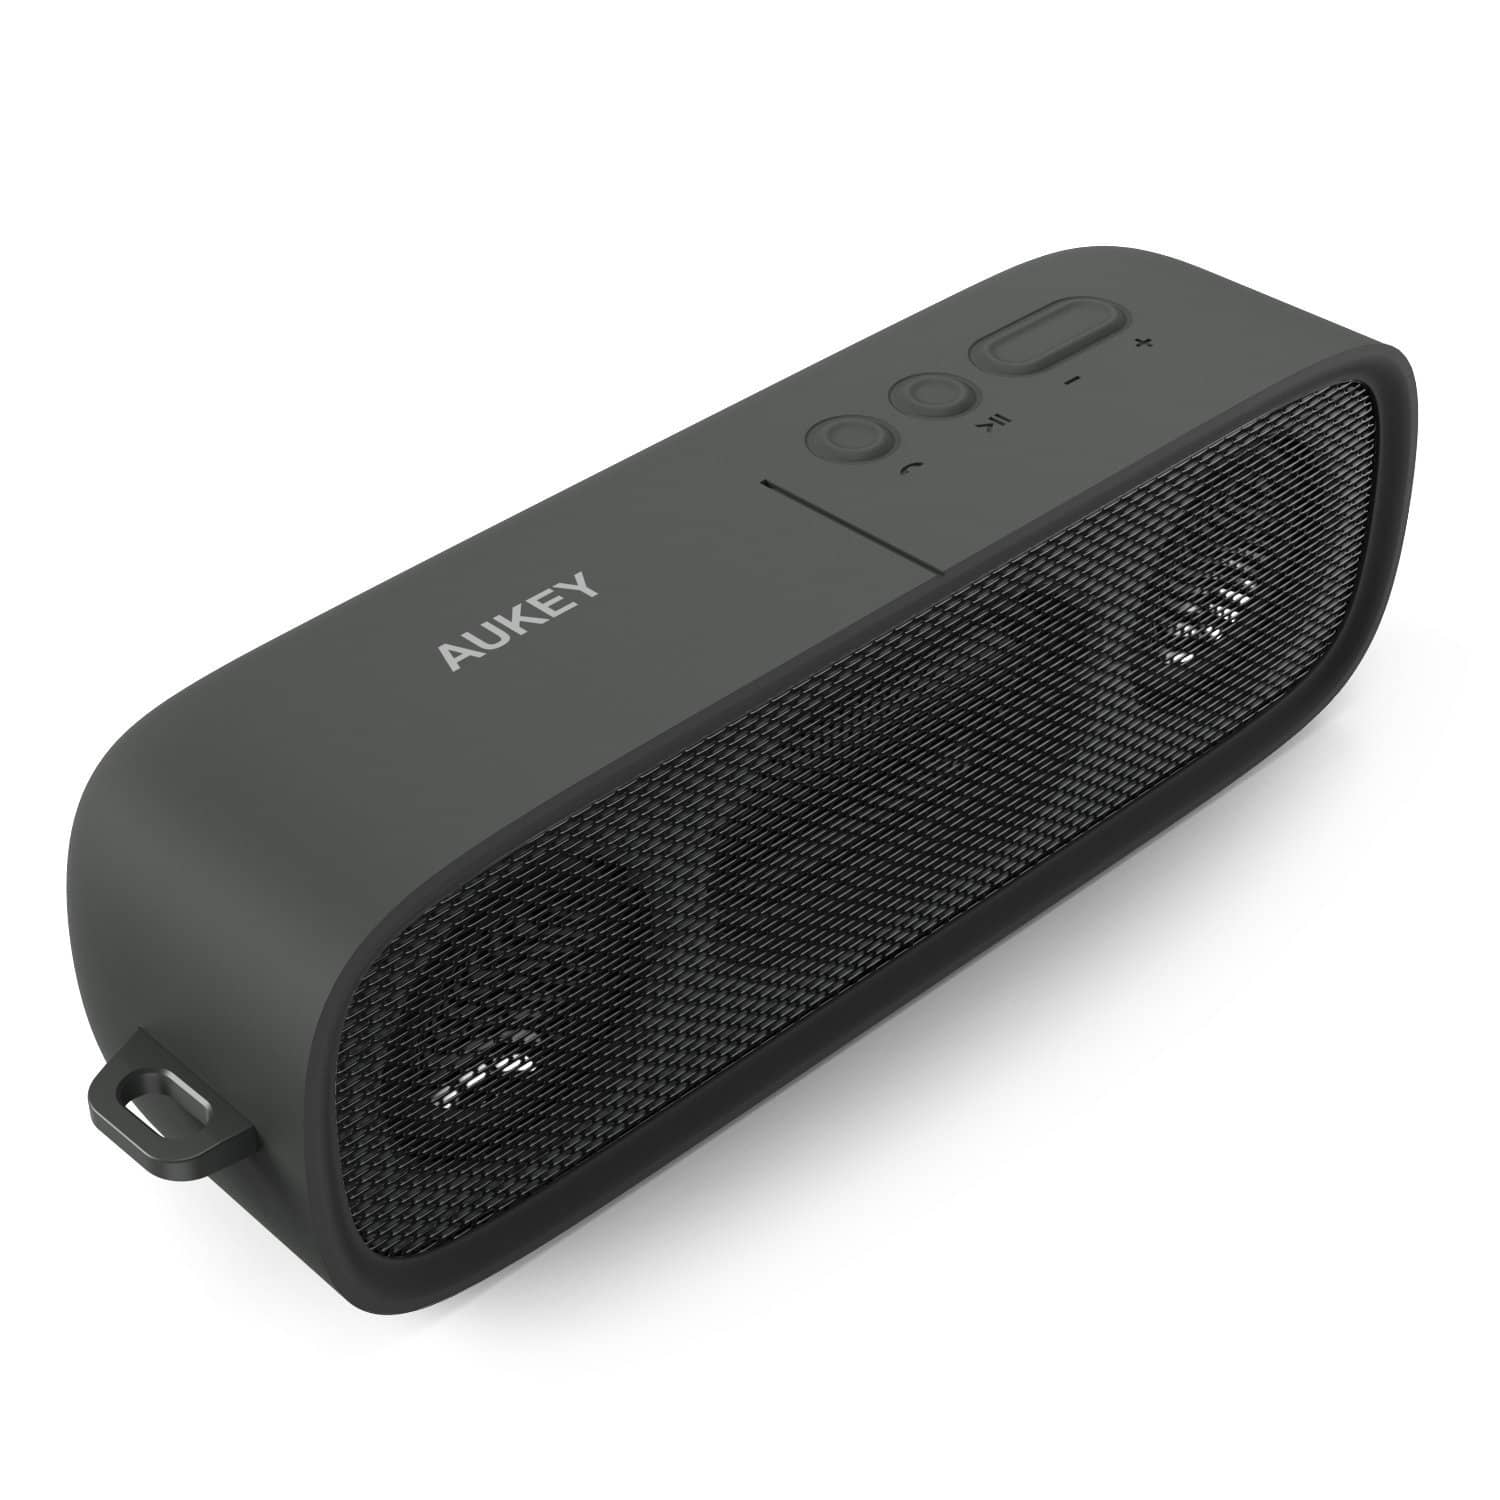 AUKEY SK-M7 Wireless Portable Bluetooth 4.1 outdoor Stereo Speaker - Black - Aukey Malaysia Official Store